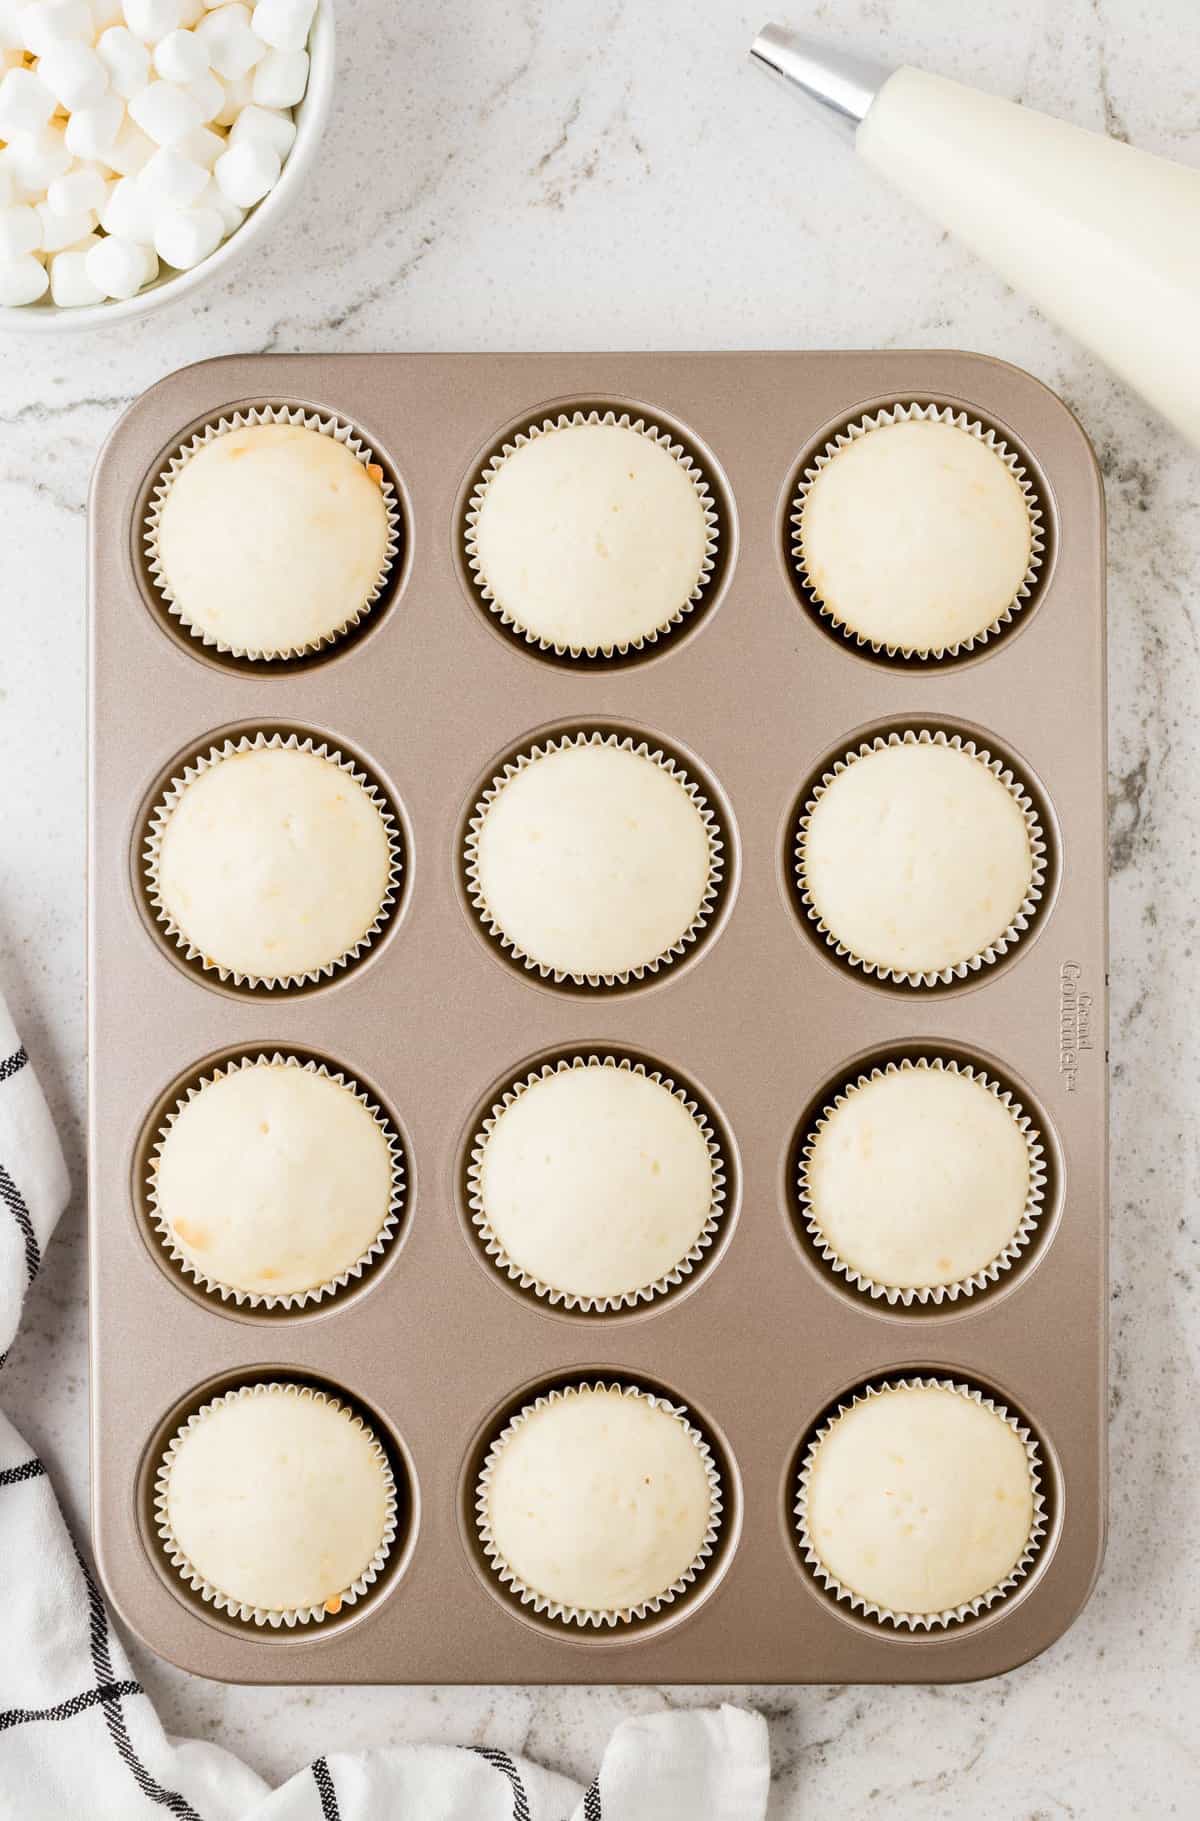 Bake Cupcakes according to package.